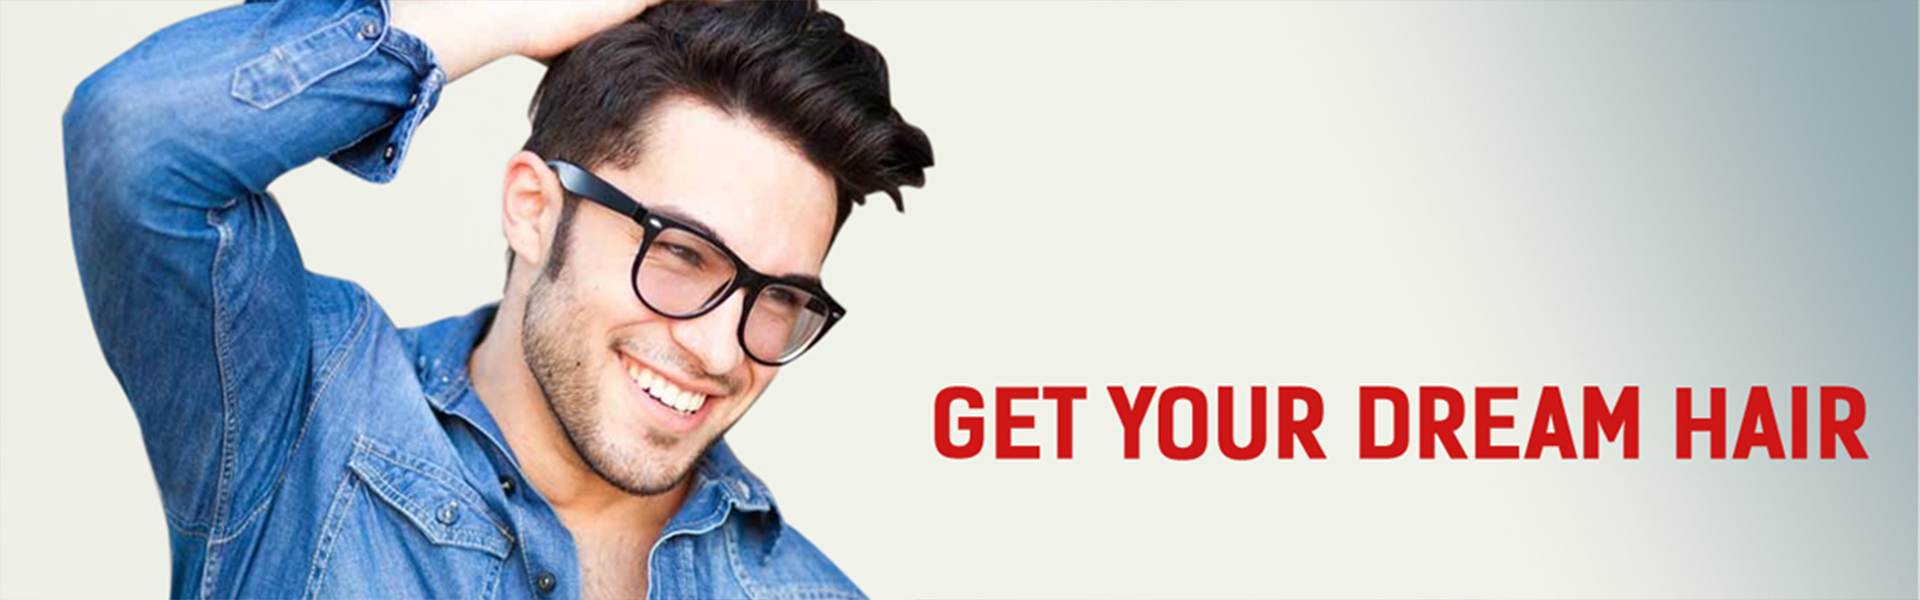 Hair Patch in Gurgaon | Hair Patch Service in Gurgaon | Men Hair Patch